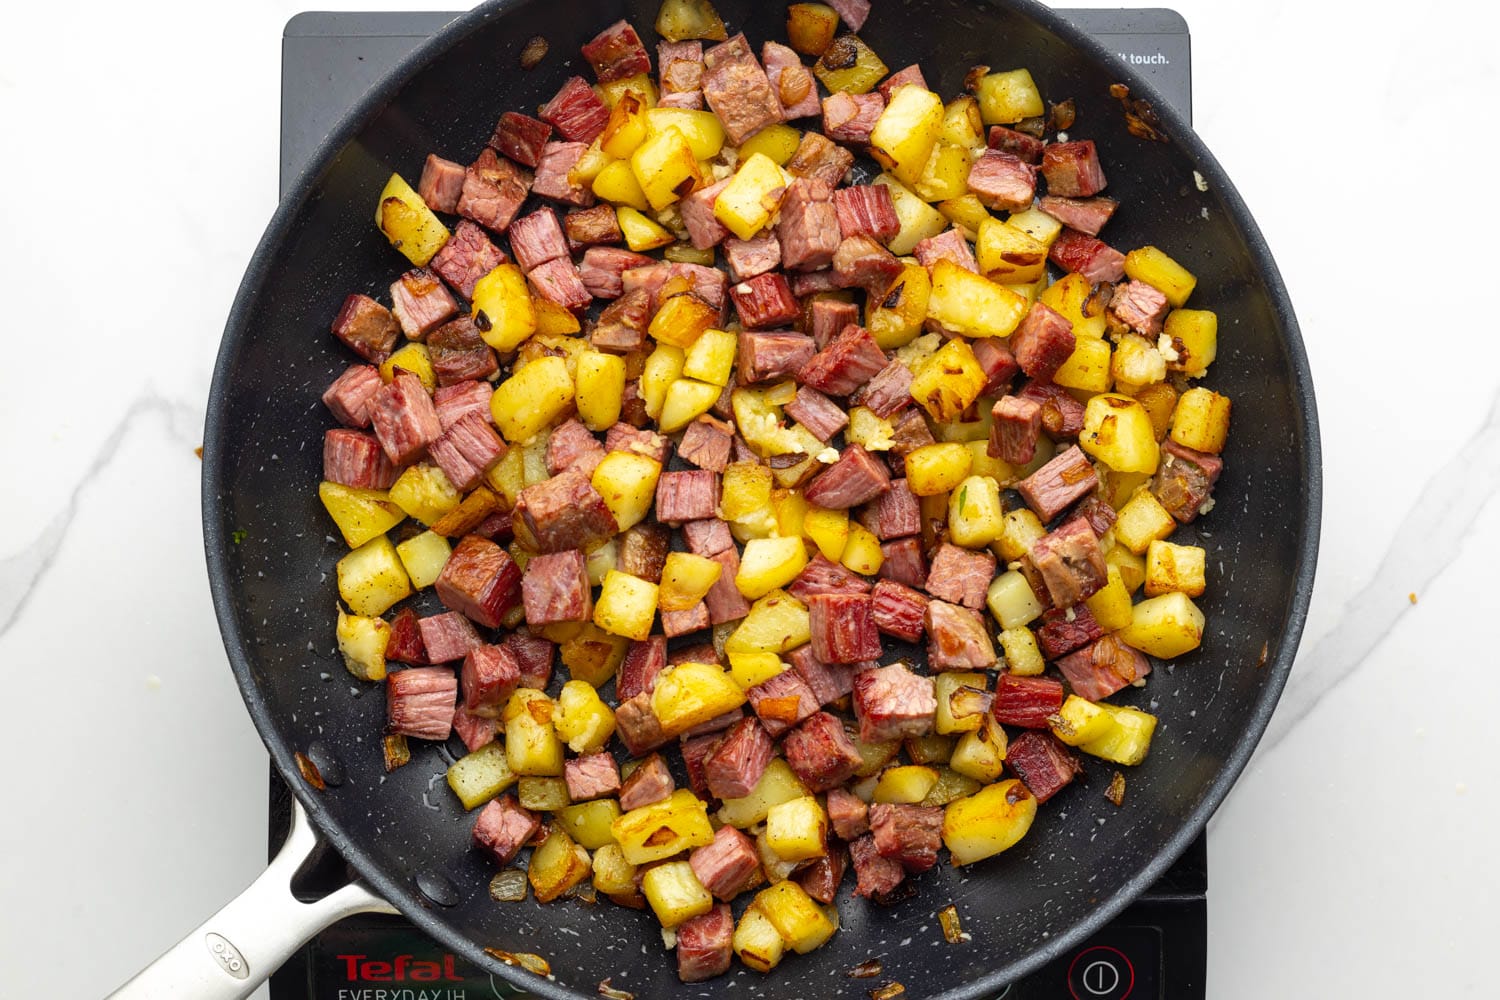 a black nonstick skillet holding browned potatoes an corned beef cubes.